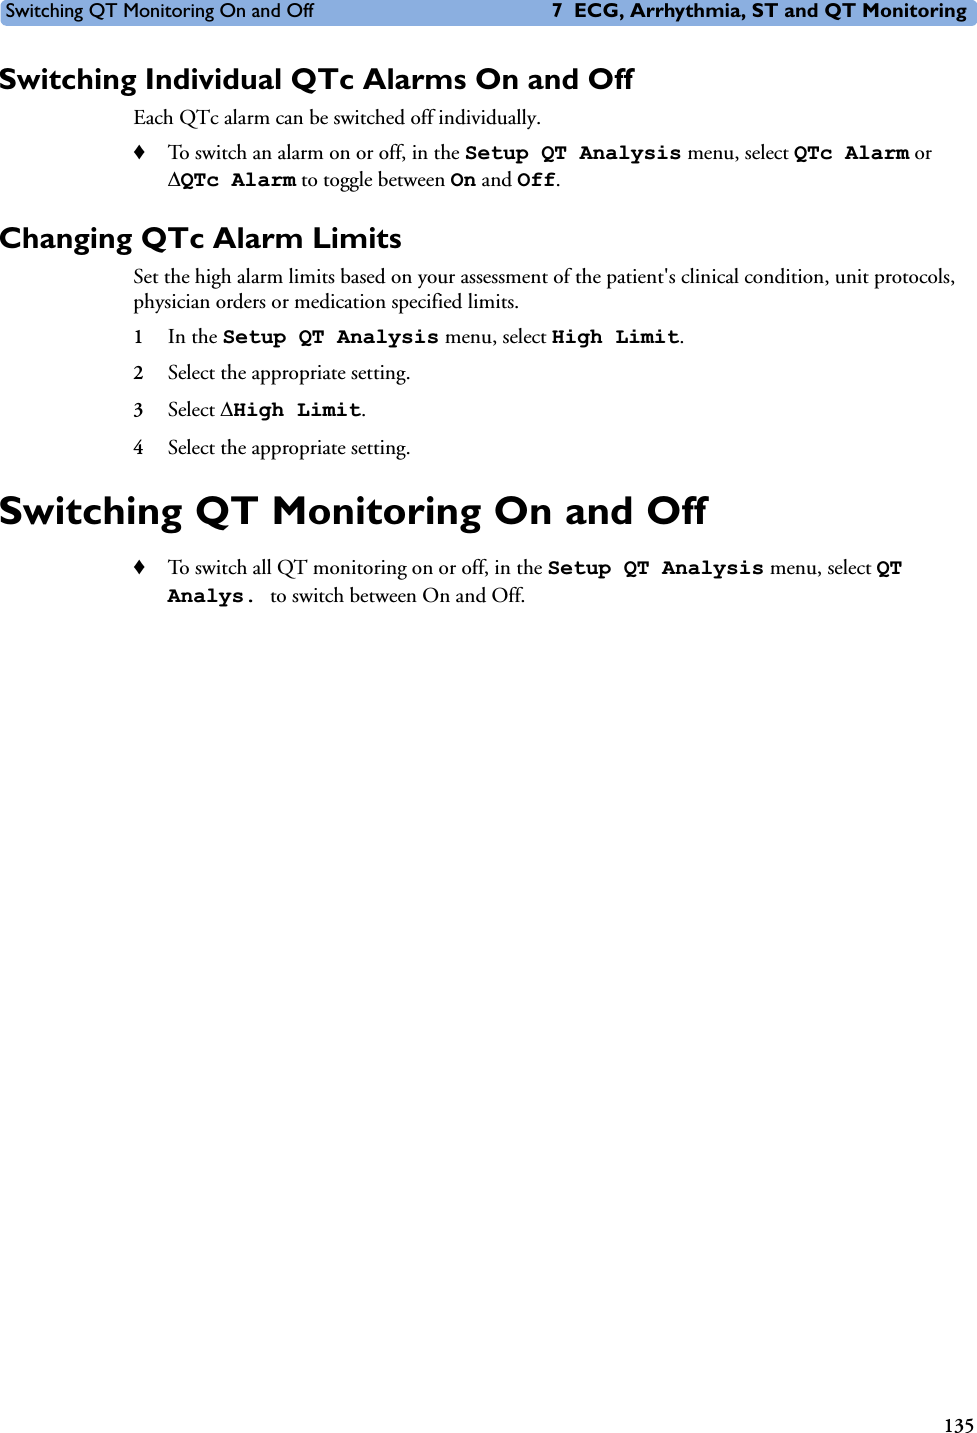 Switching QT Monitoring On and Off 7 ECG, Arrhythmia, ST and QT Monitoring135Switching Individual QTc Alarms On and OffEach QTc alarm can be switched off individually. ♦To switch an alarm on or off, in the Setup QT Analysis menu, select QTc Alarm or &apos;QTc Alarm to toggle between On and Off. Changing QTc Alarm LimitsSet the high alarm limits based on your assessment of the patient&apos;s clinical condition, unit protocols, physician orders or medication specified limits.1In the Setup QT Analysis menu, select High Limit.2Select the appropriate setting. 3Select &apos;High Limit.4Select the appropriate setting.Switching QT Monitoring On and Off♦To switch all QT monitoring on or off, in the Setup QT Analysis menu, select QT Analys. to switch between On and Off.